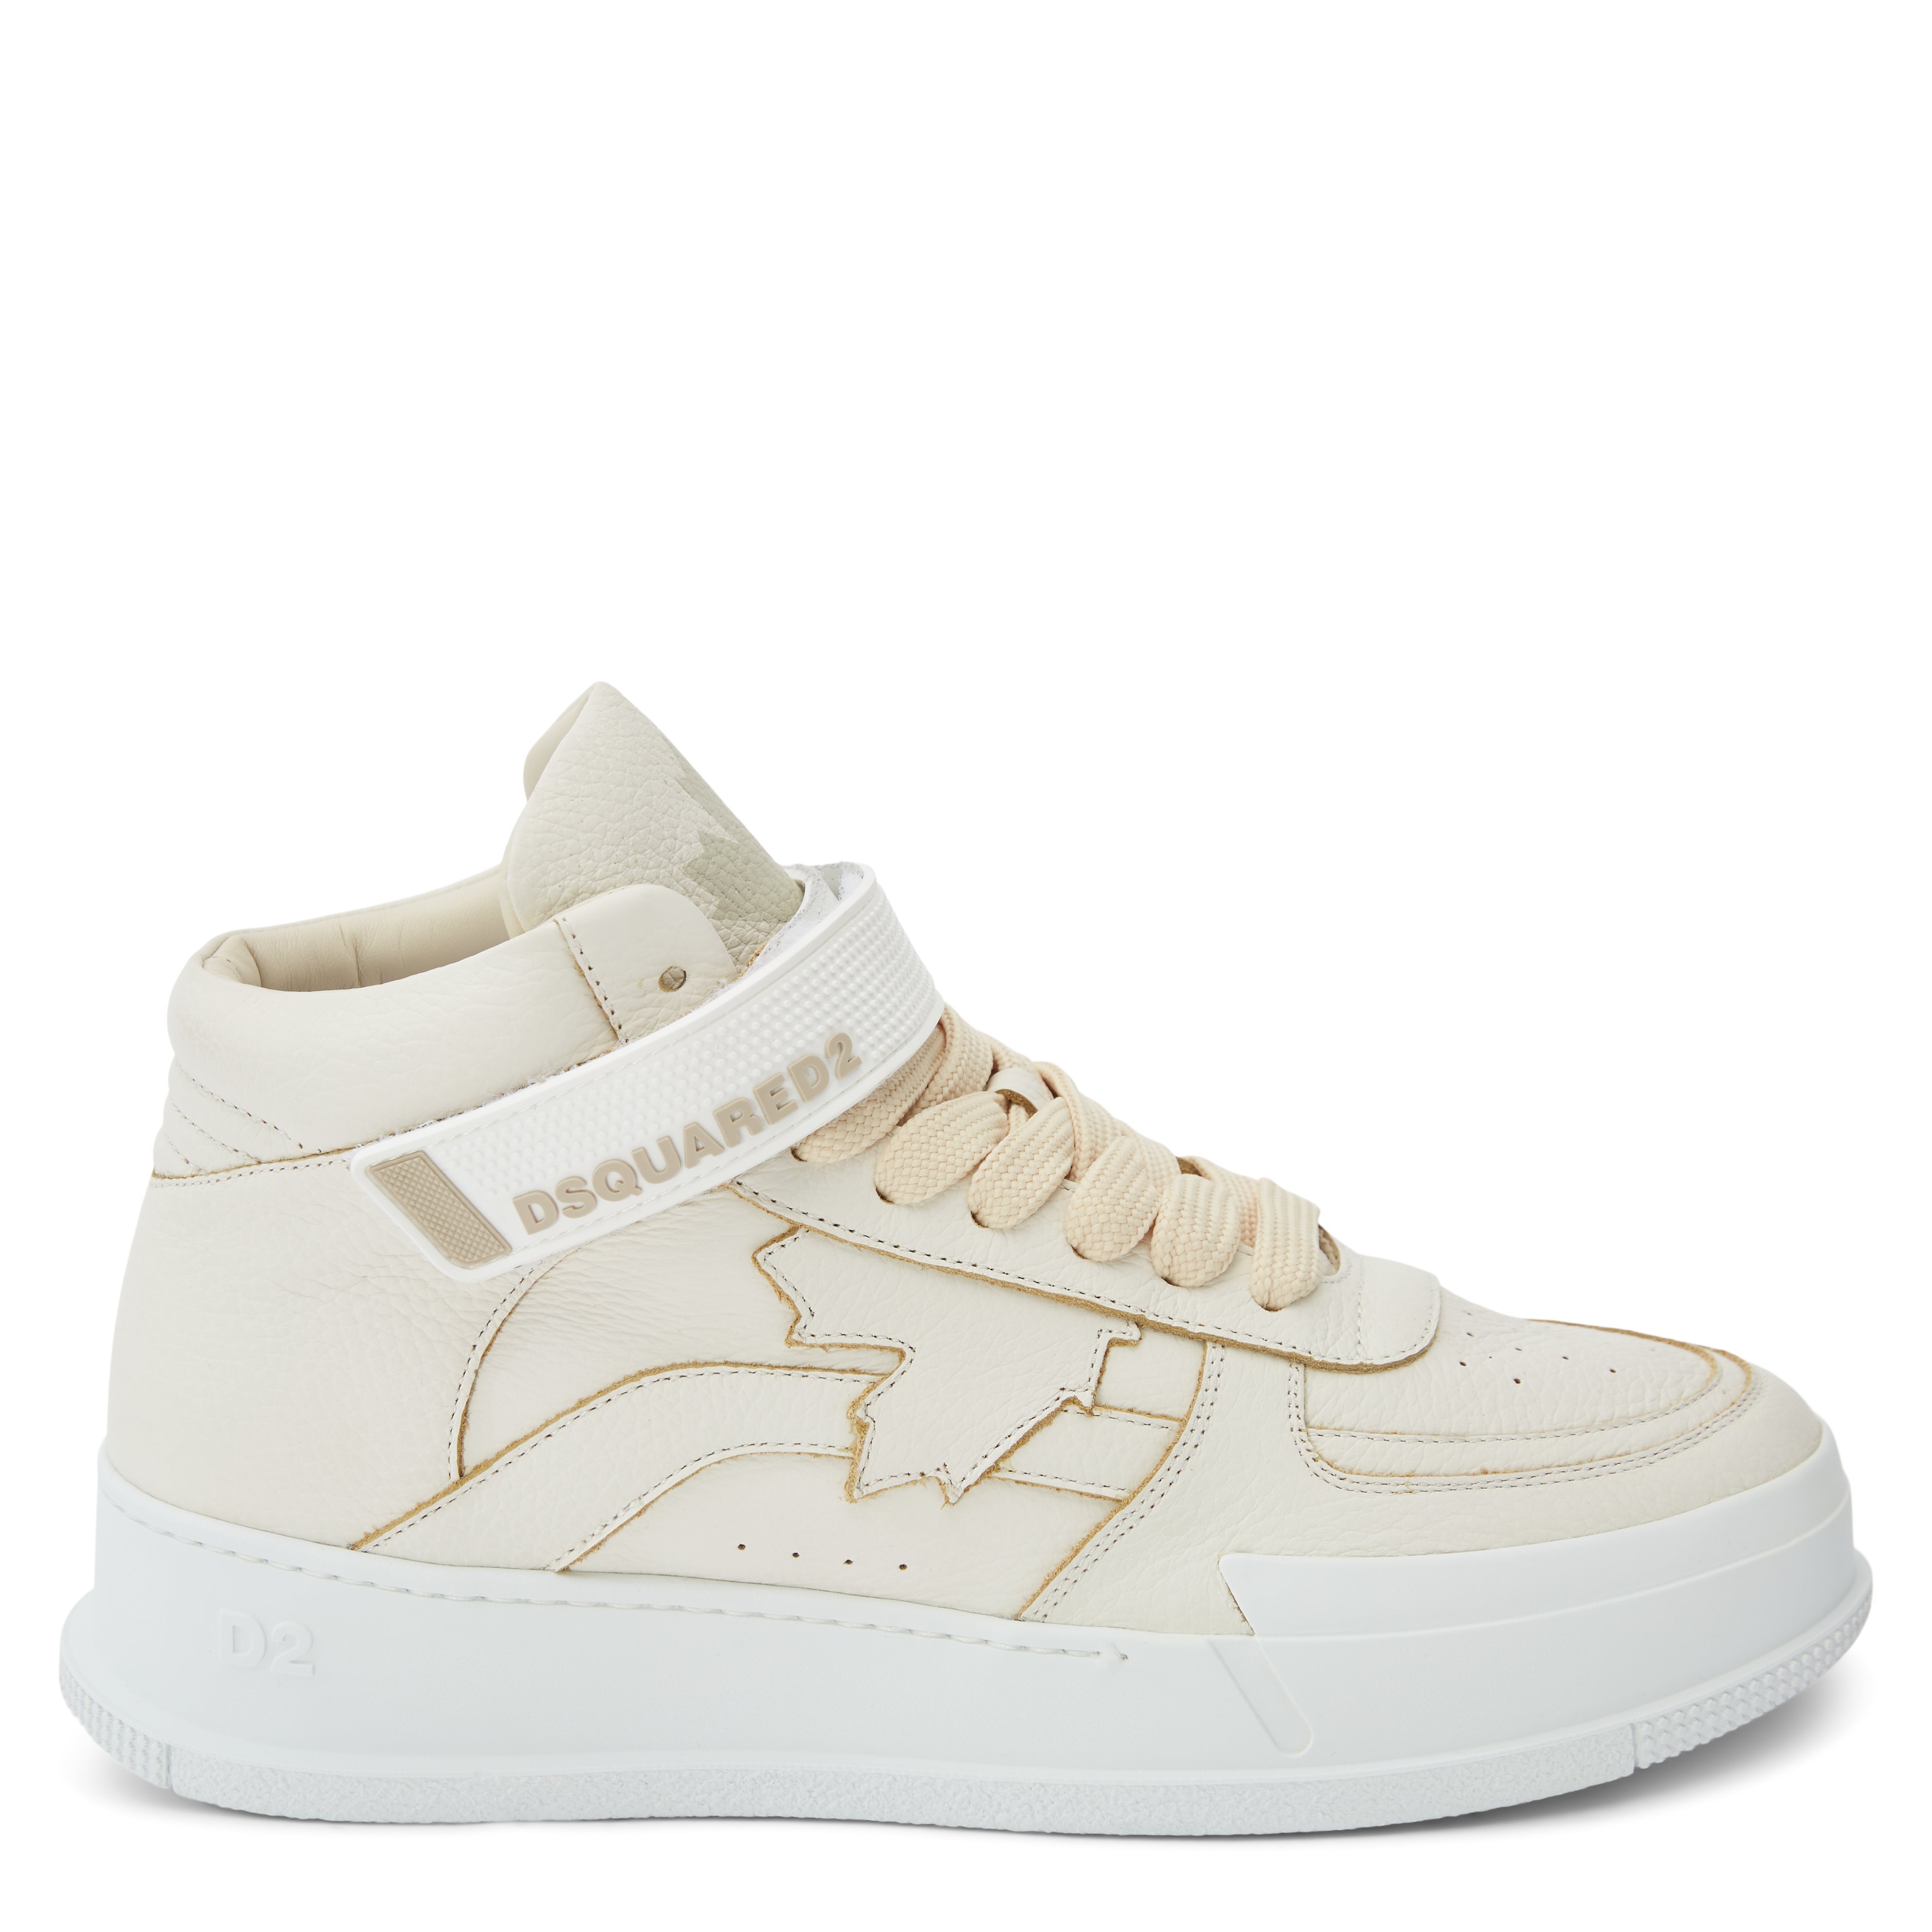 Dsquared2 Shoes SNM0250 25102624 White